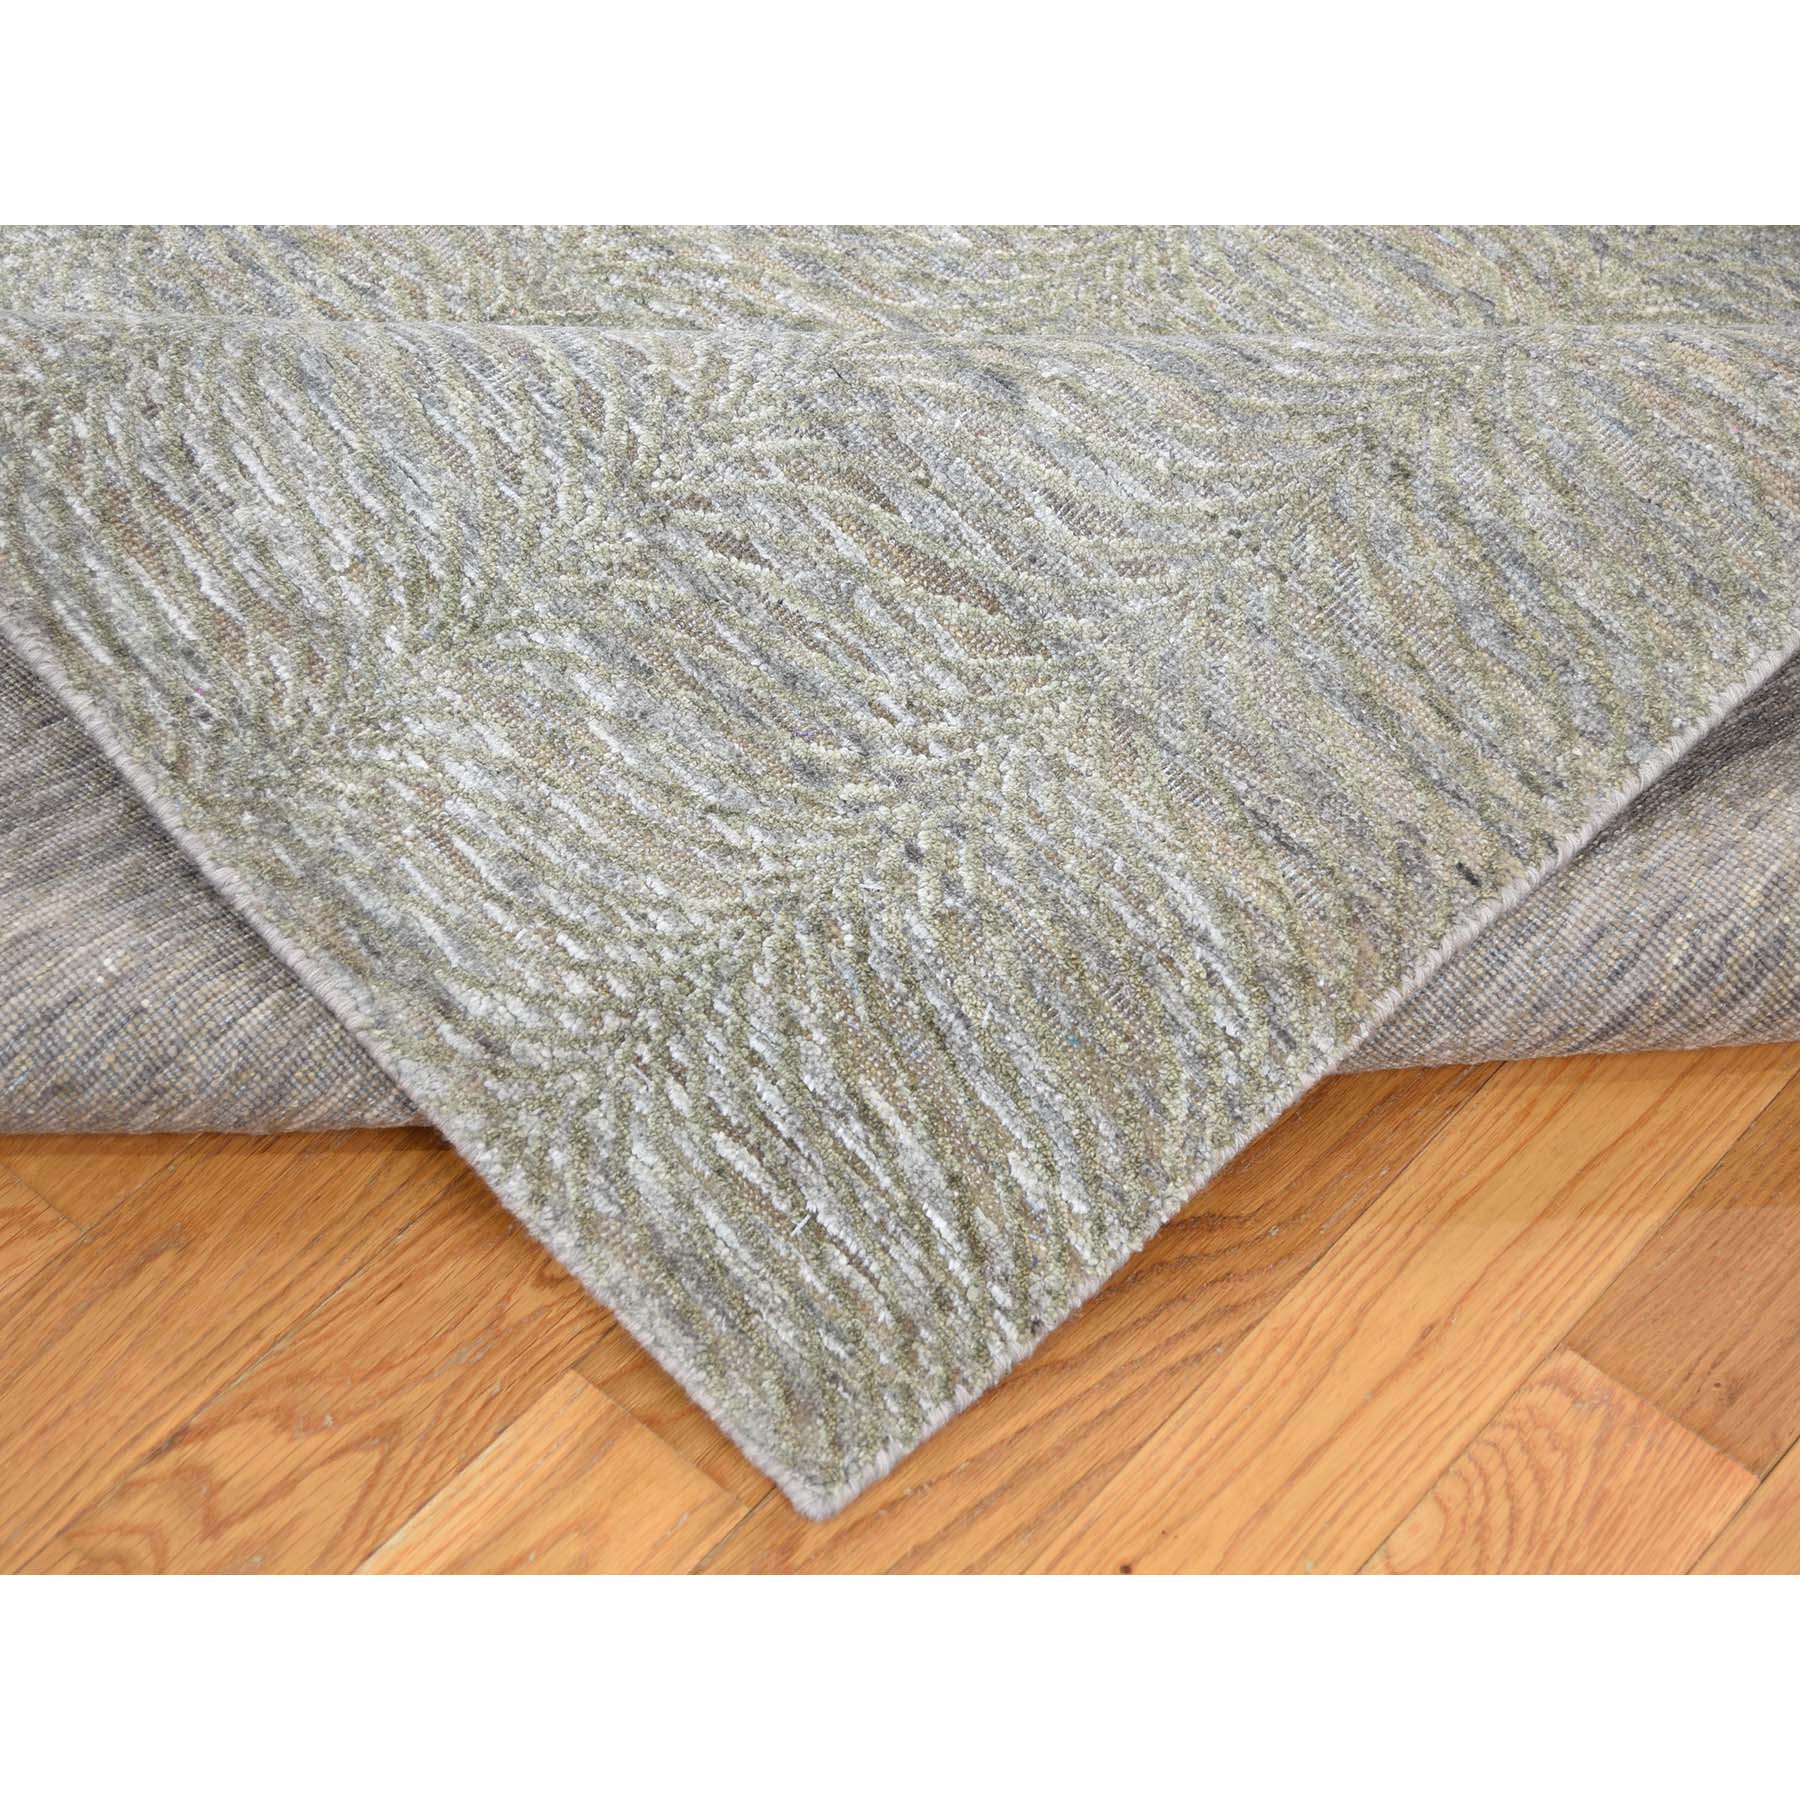 9'x12' Real Silk with Textured Wool Tone on Tone Hand Woven Oriental Rug 